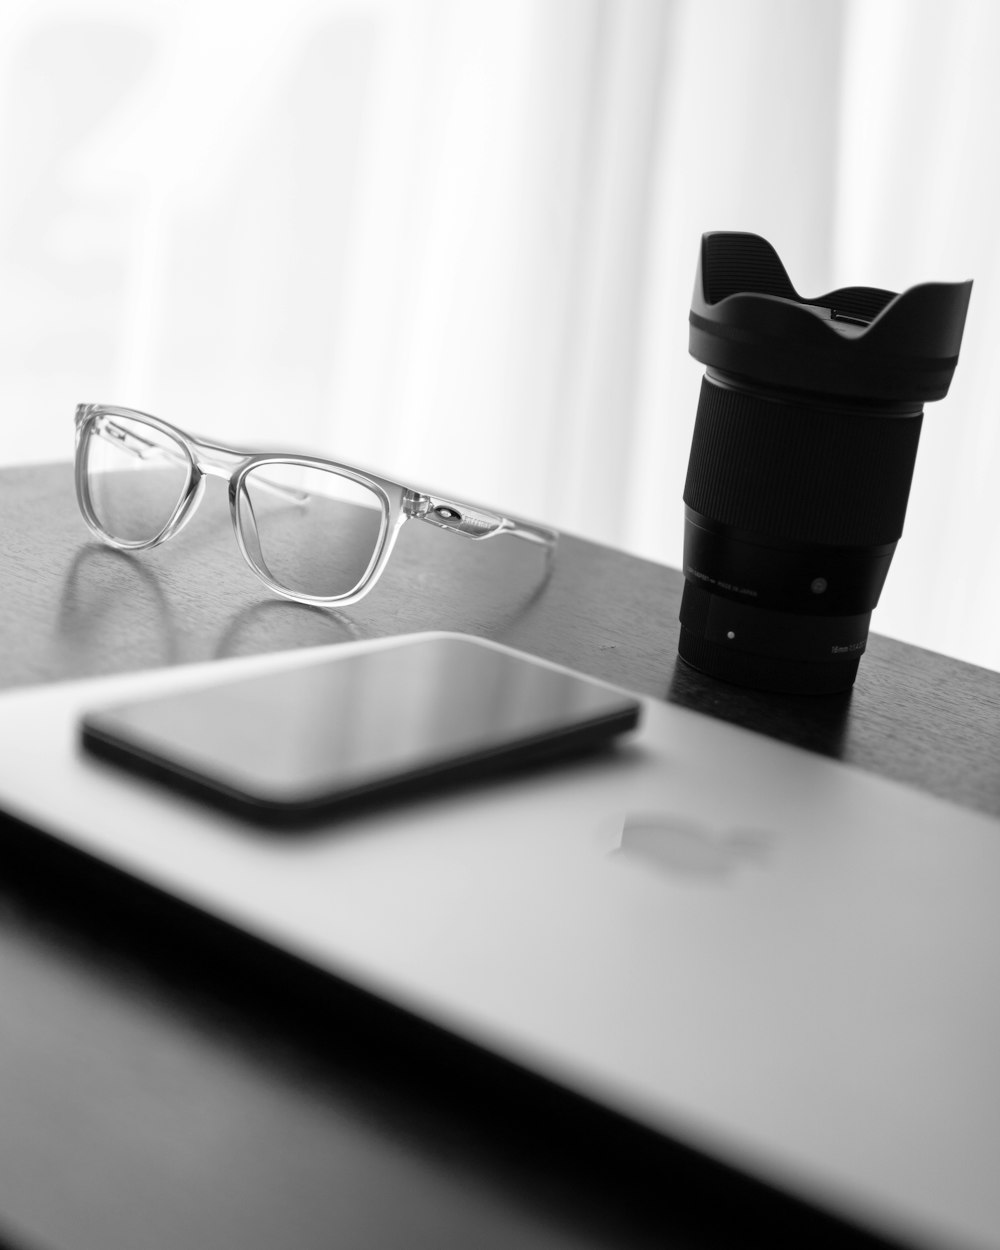 a pair of glasses and a cell phone on a table